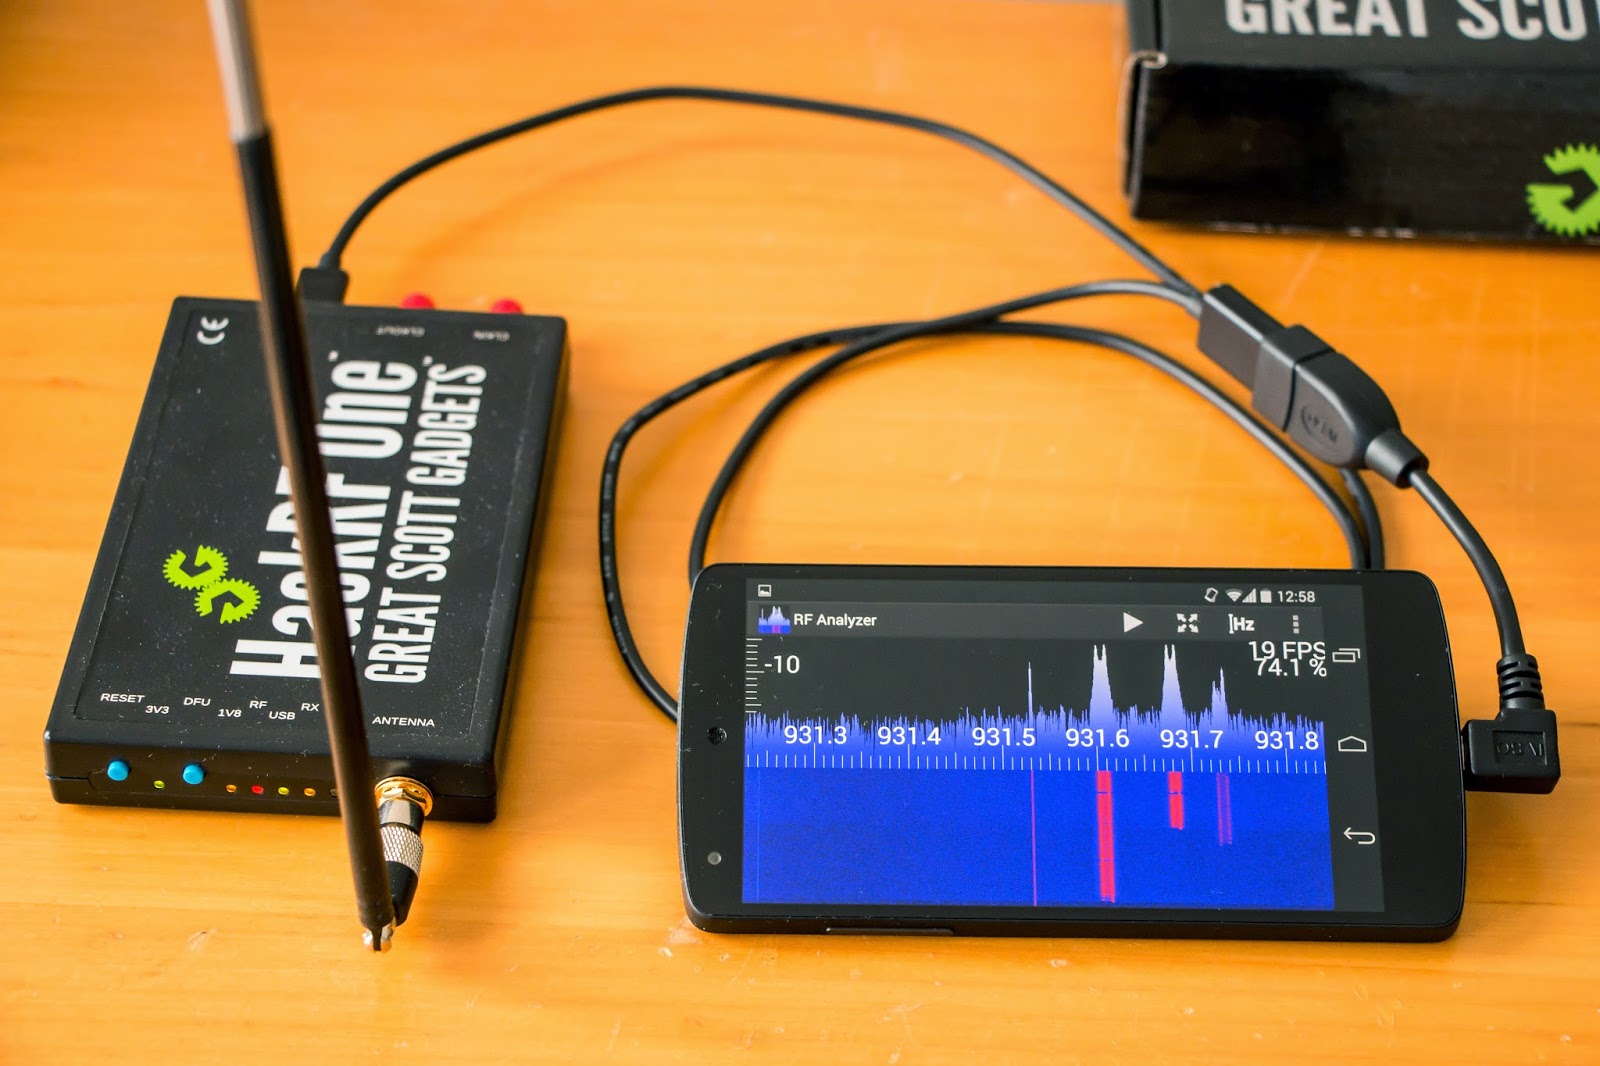 Mantz Tech: RF Analyzer - Explore the frequency spectrum with the